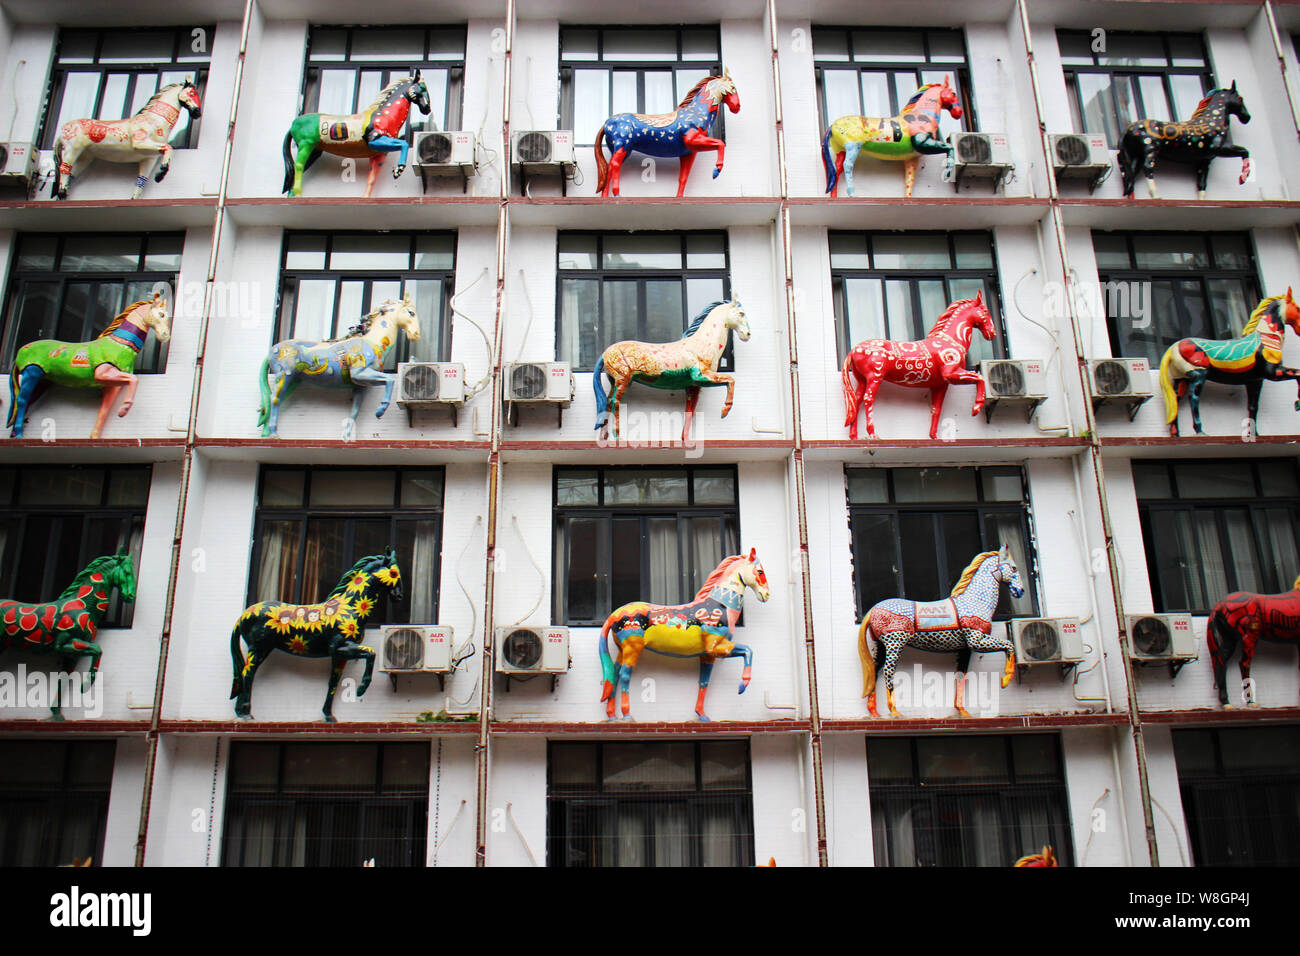 Horse sculptures are on display outside the windows of guest rooms in a hotel building in Chongqing, China, 21 November 2015.   Though the Year of the Stock Photo